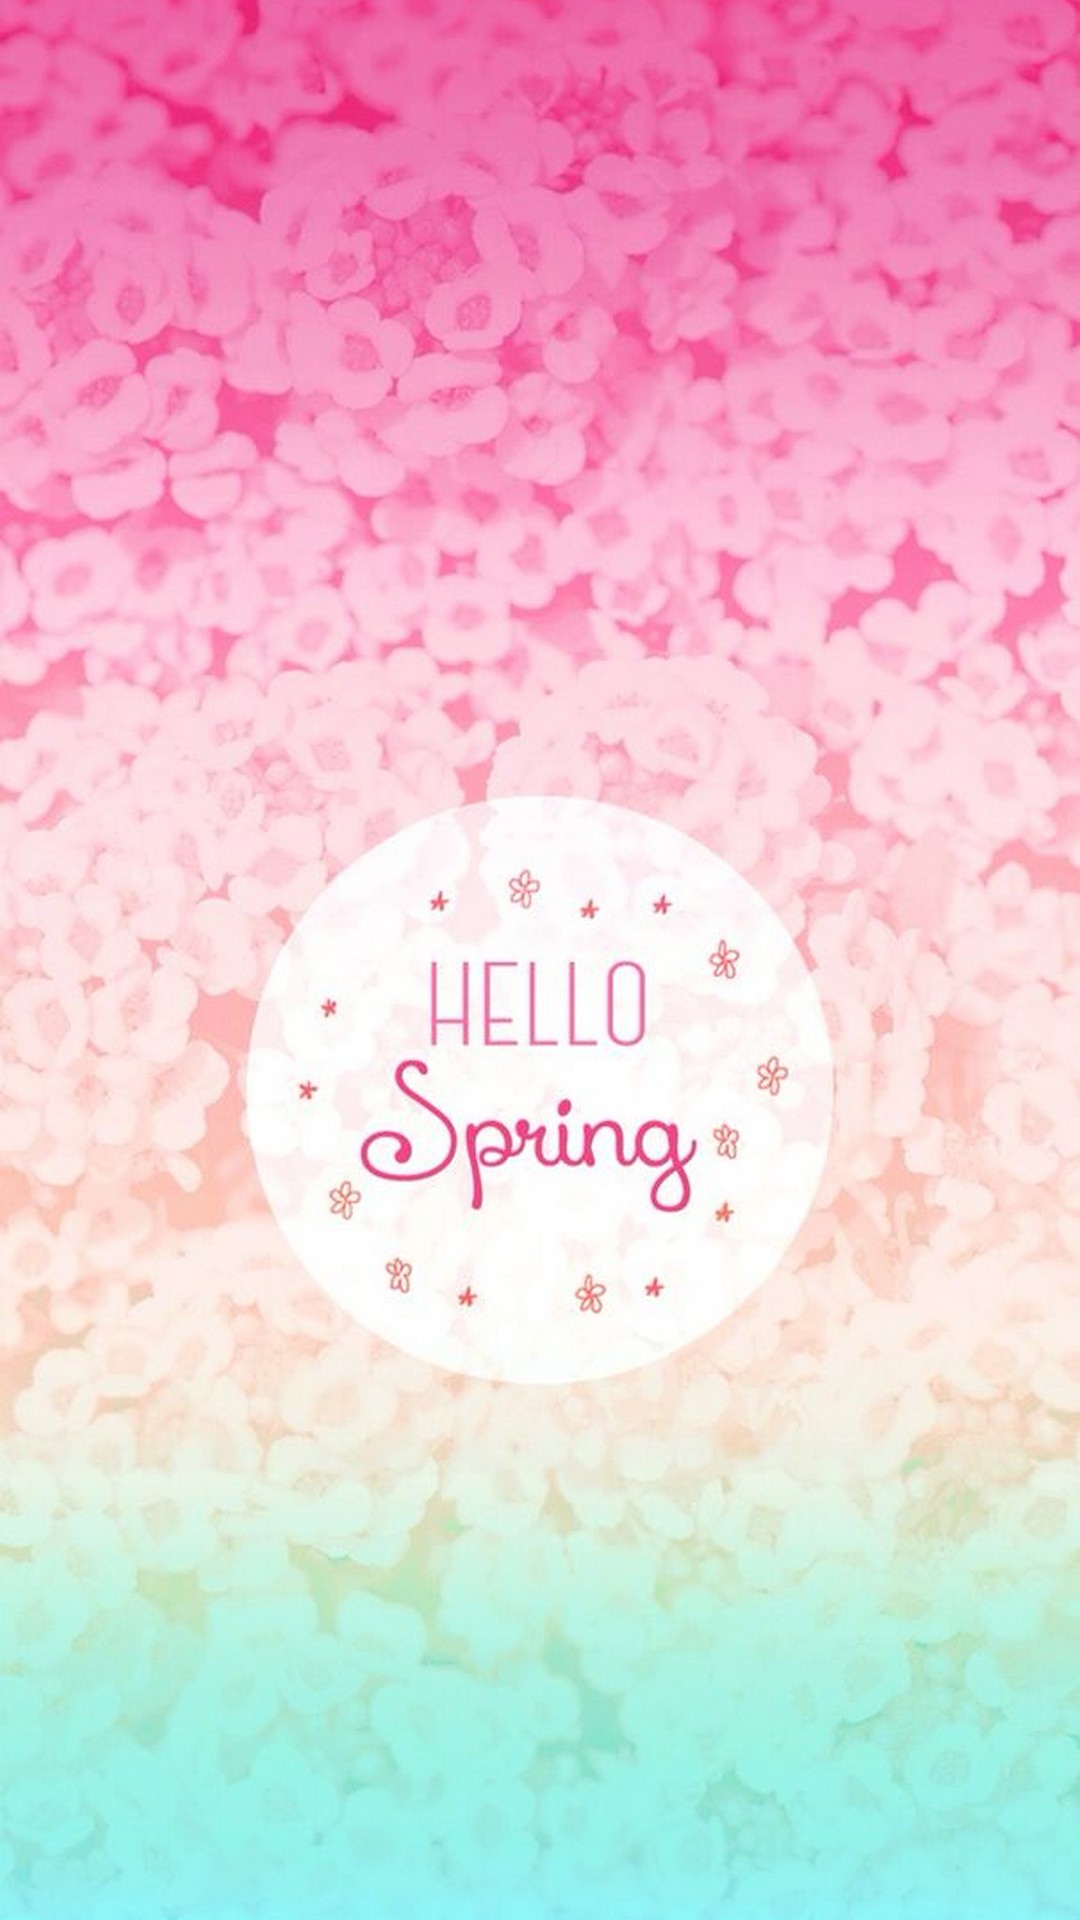 iPhone X Wallpaper Hello Spring with HD Resolution 1080X1920